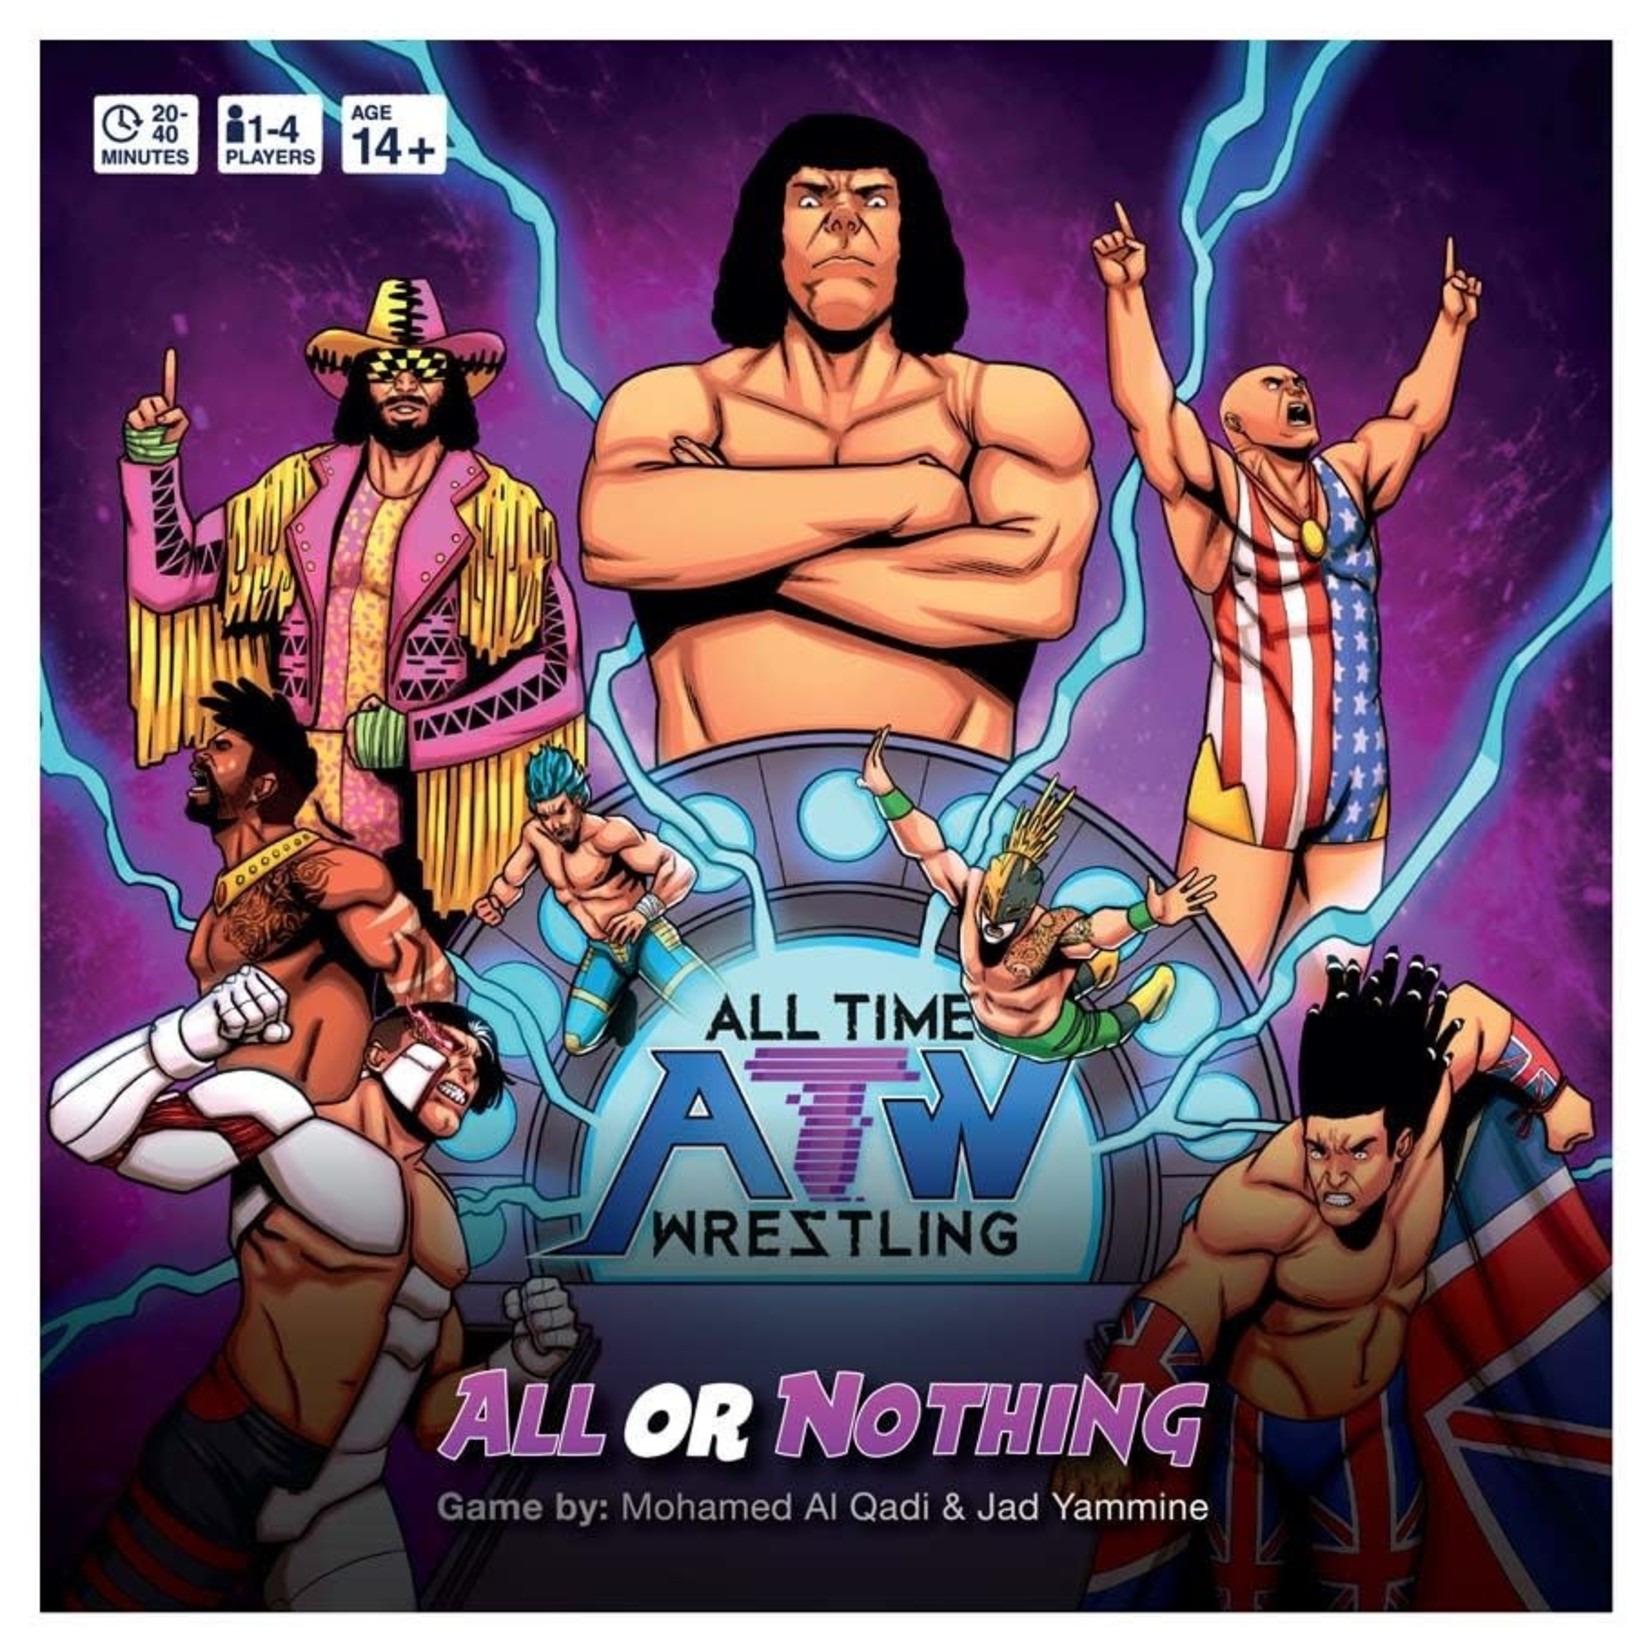 All Time Wrestling: All or Nothing Edition